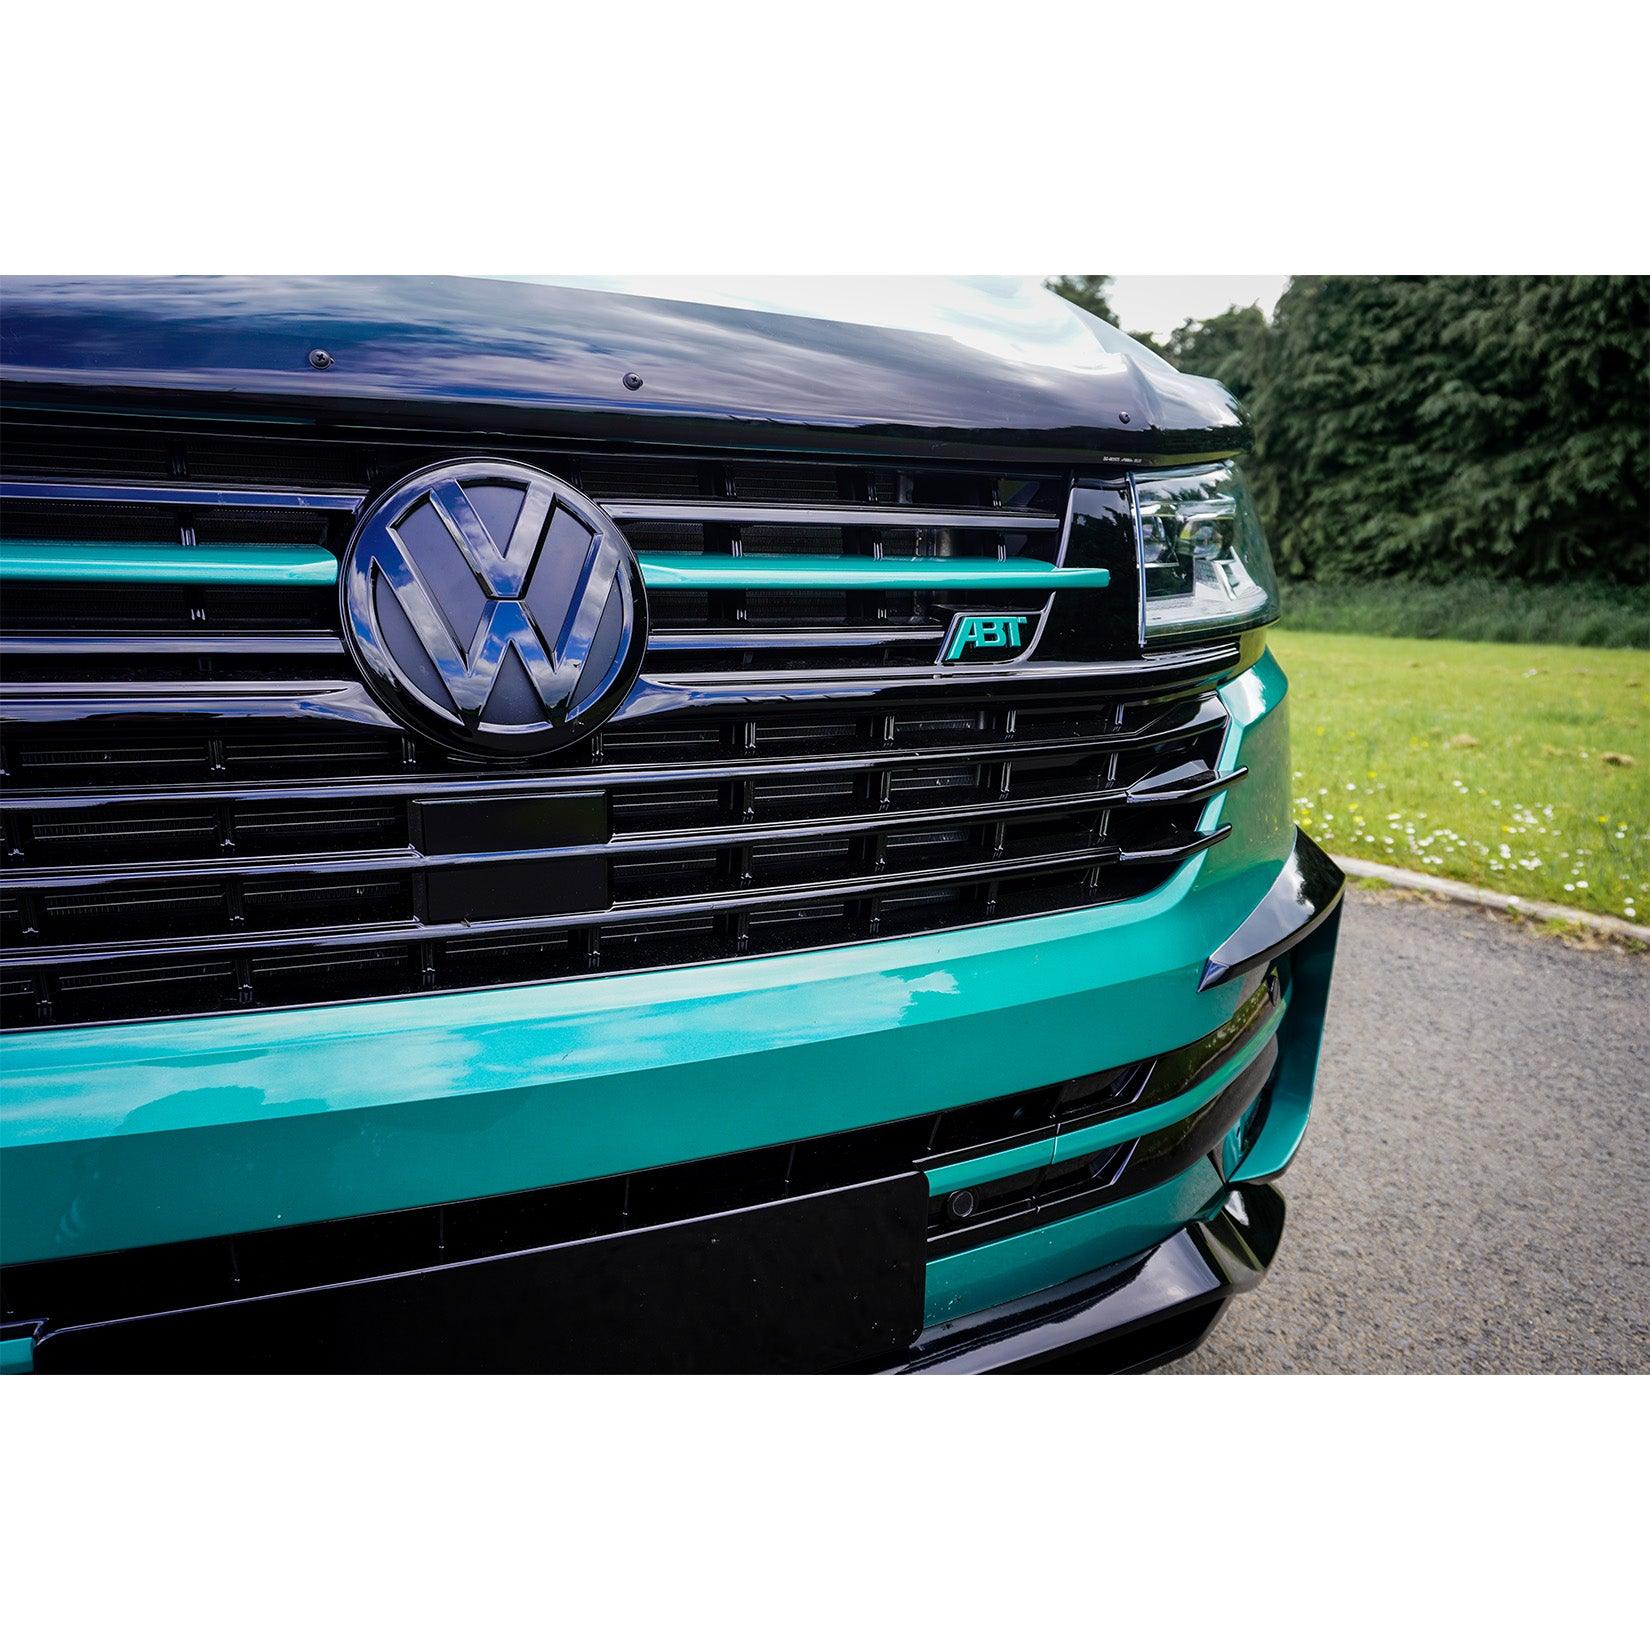 VW TRANSPORTER T6.1 2019 ON – ABT FRONT GRILLE ADD-ON - RisperStyling